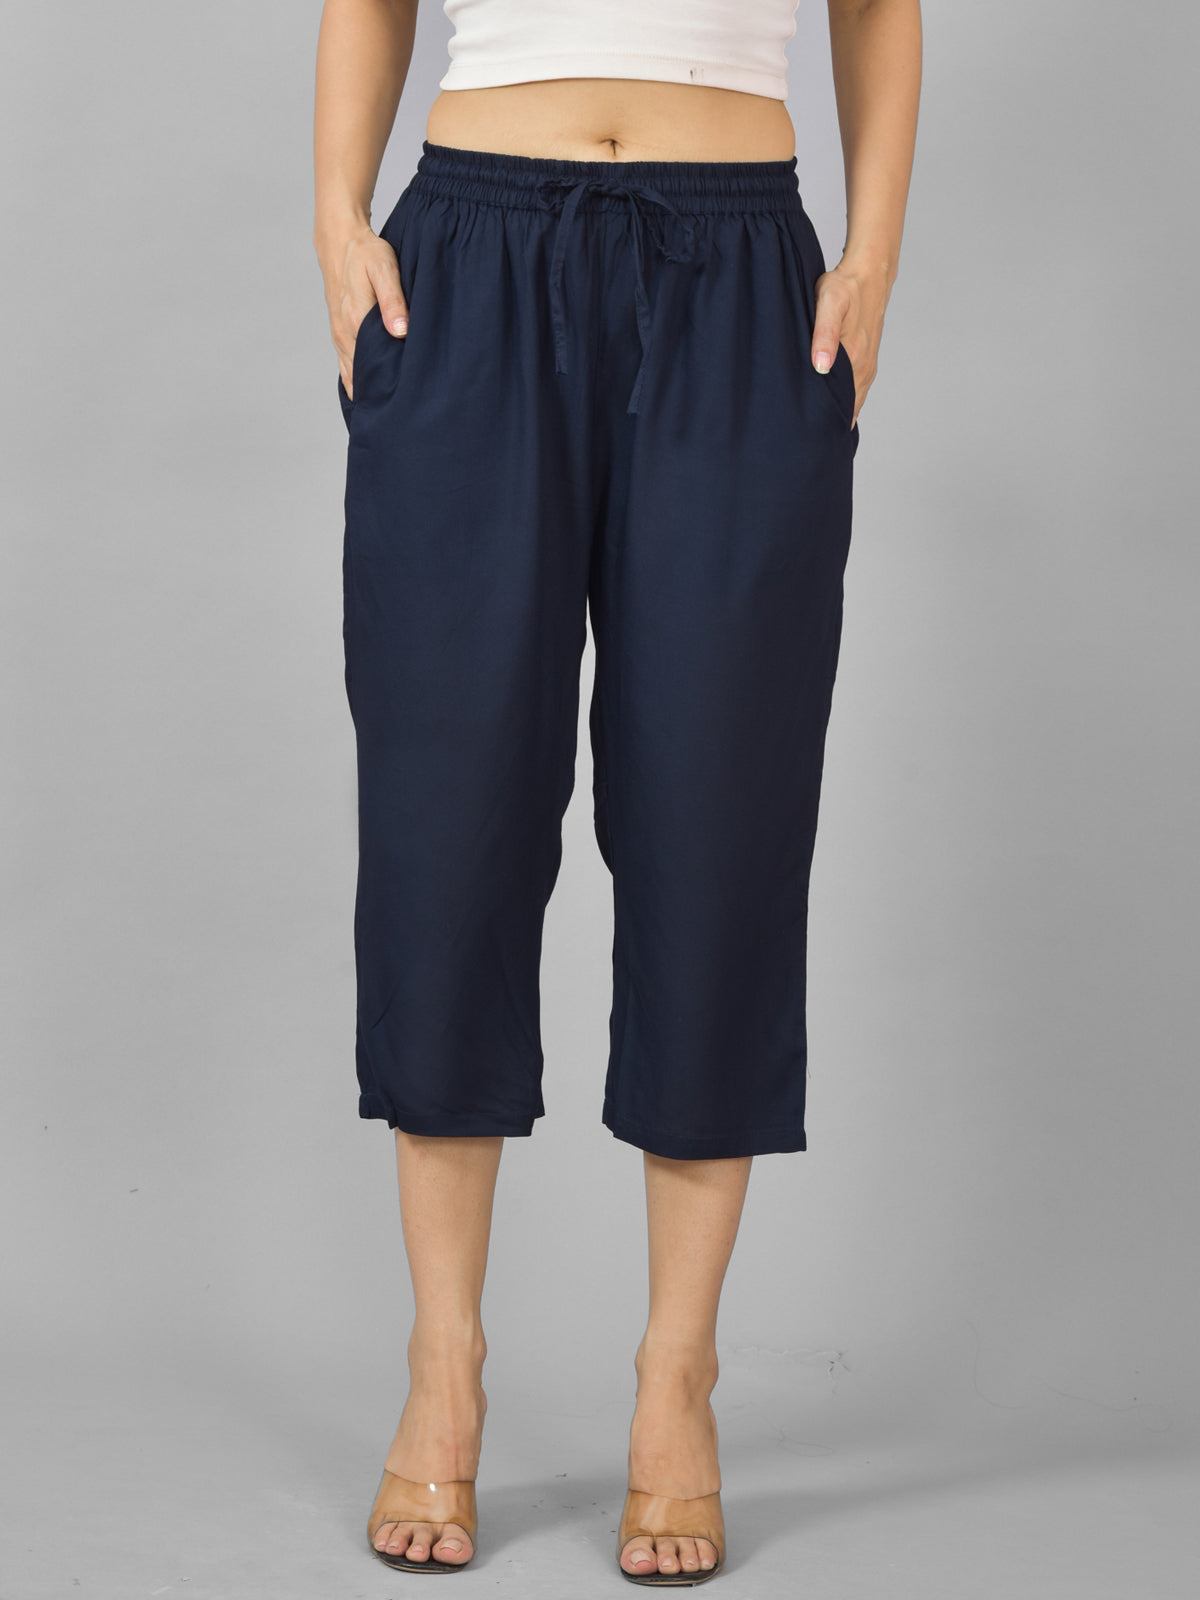 Pack Of 2 Womens Navy Blue And Rani Pink Calf Length Rayon Culottes Trouser Combo